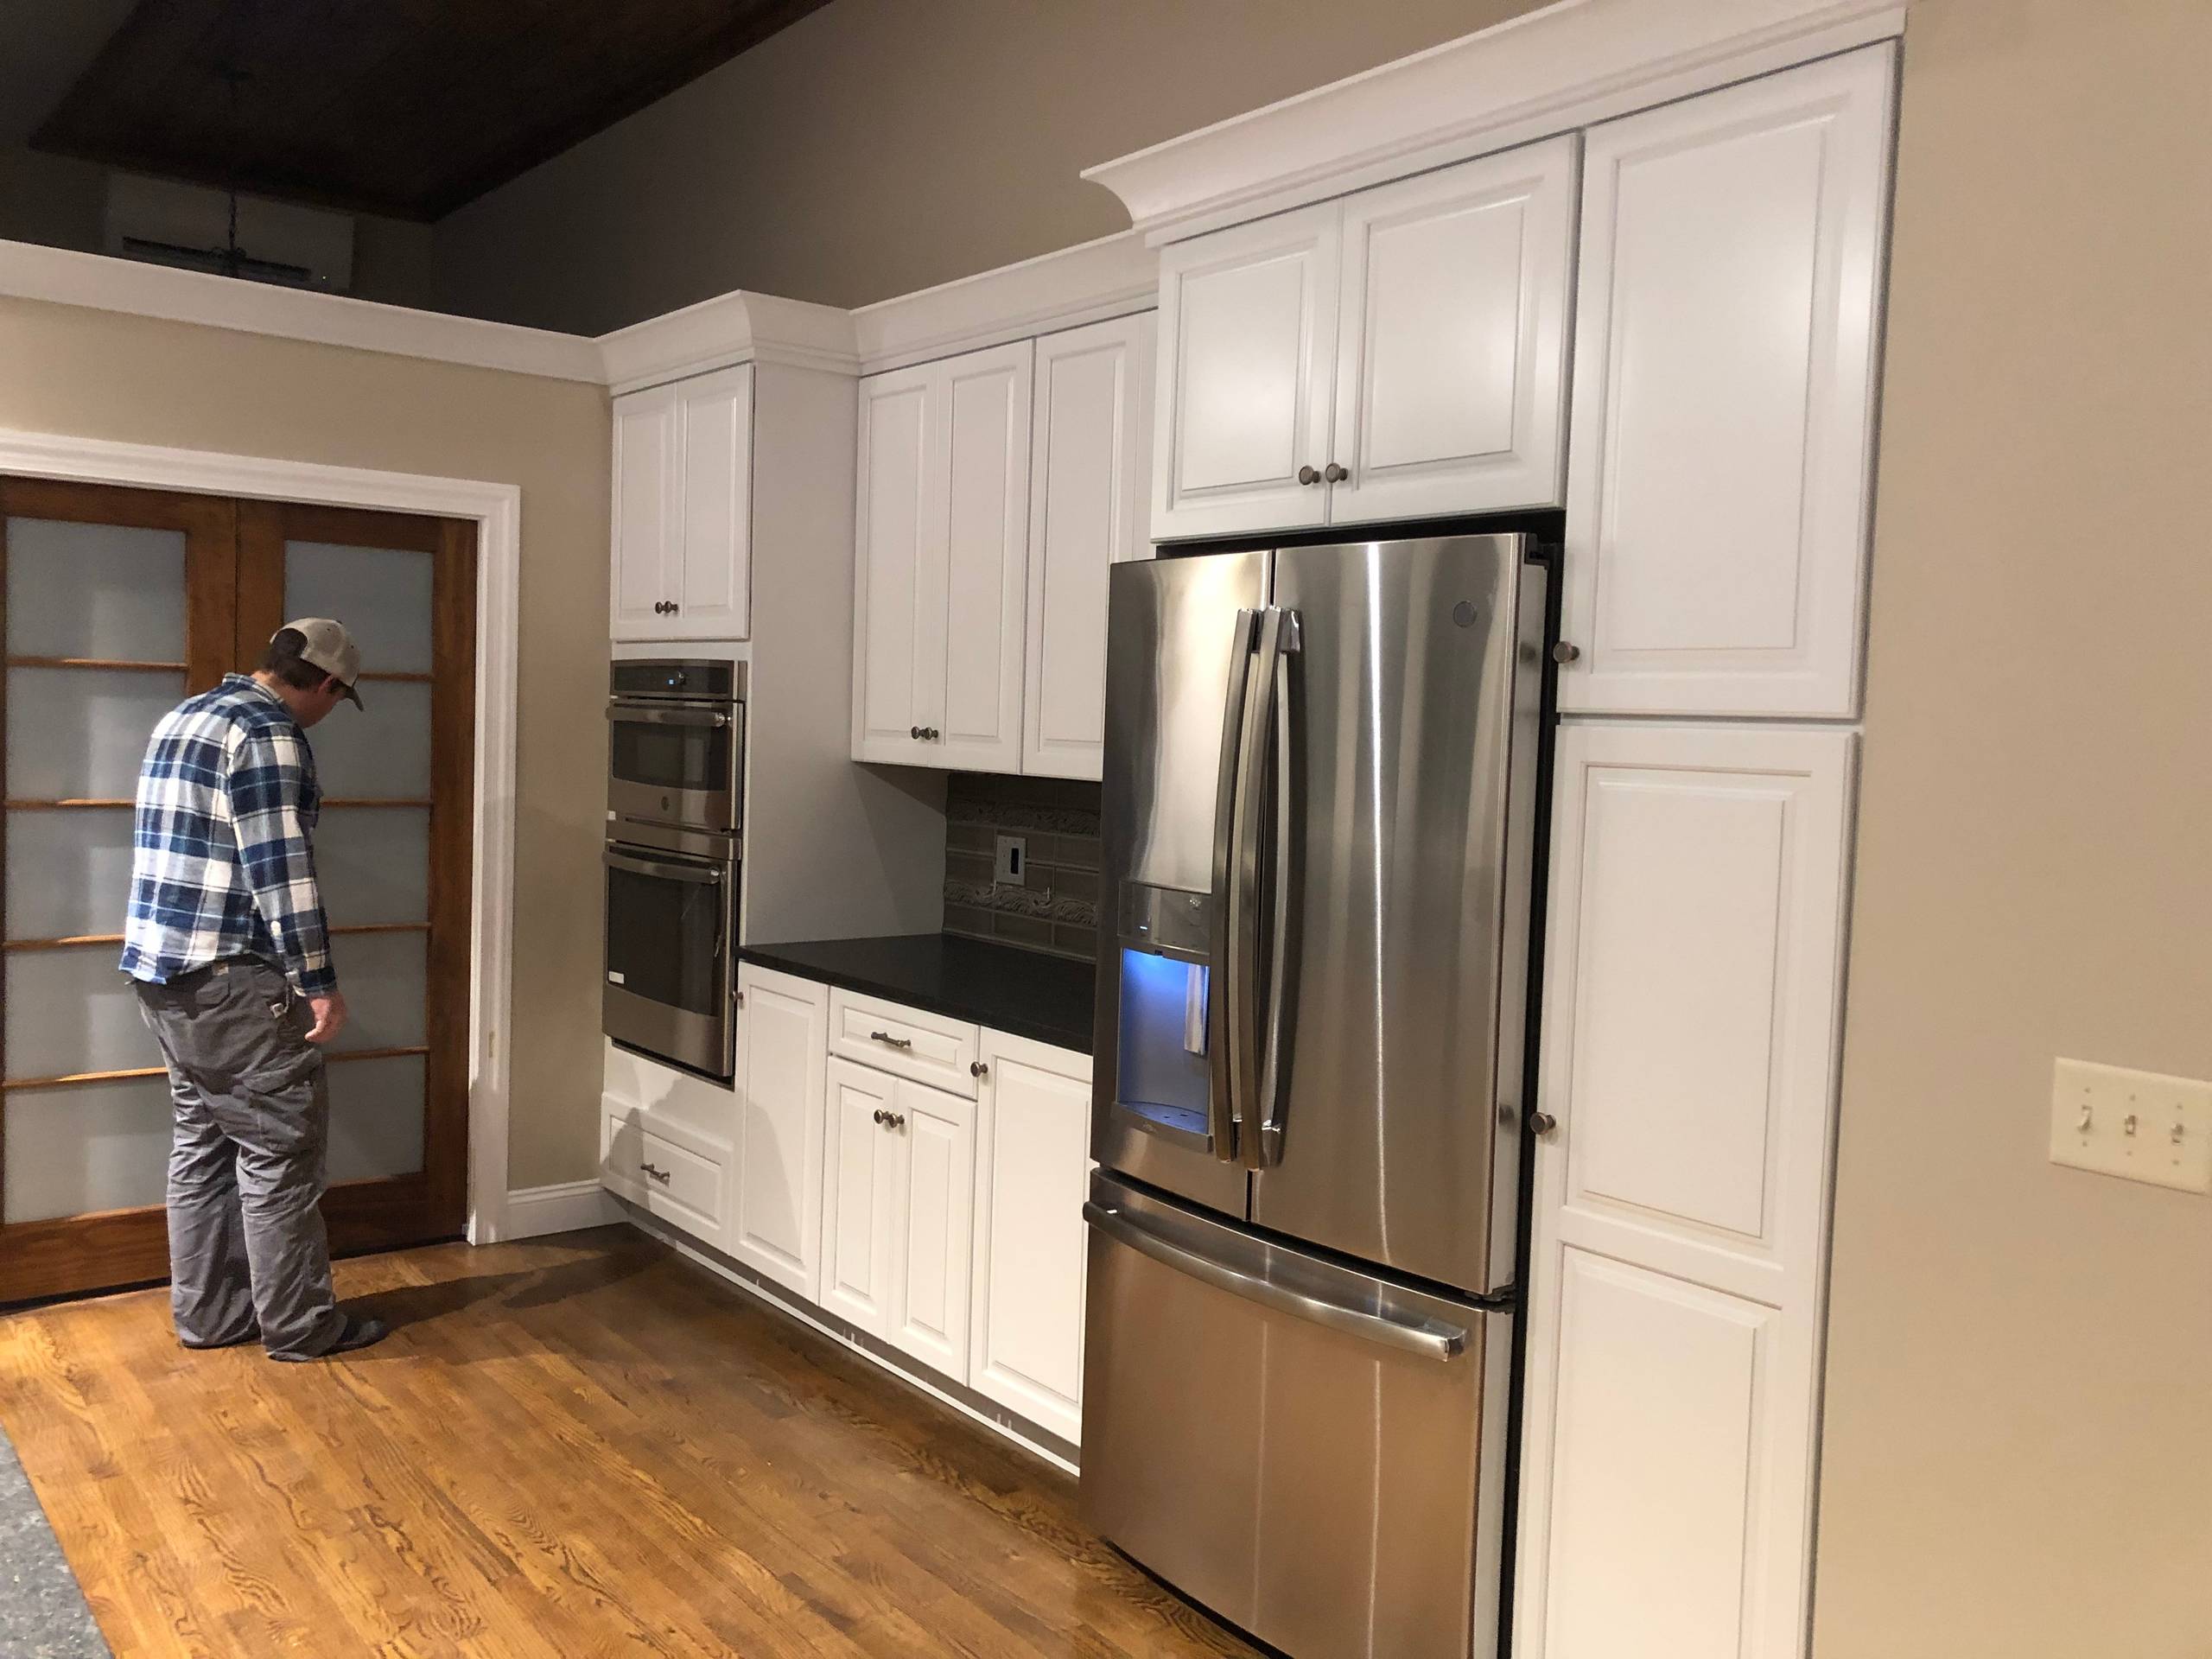 Kitchen and Mudroom Addition and Interior Renovation